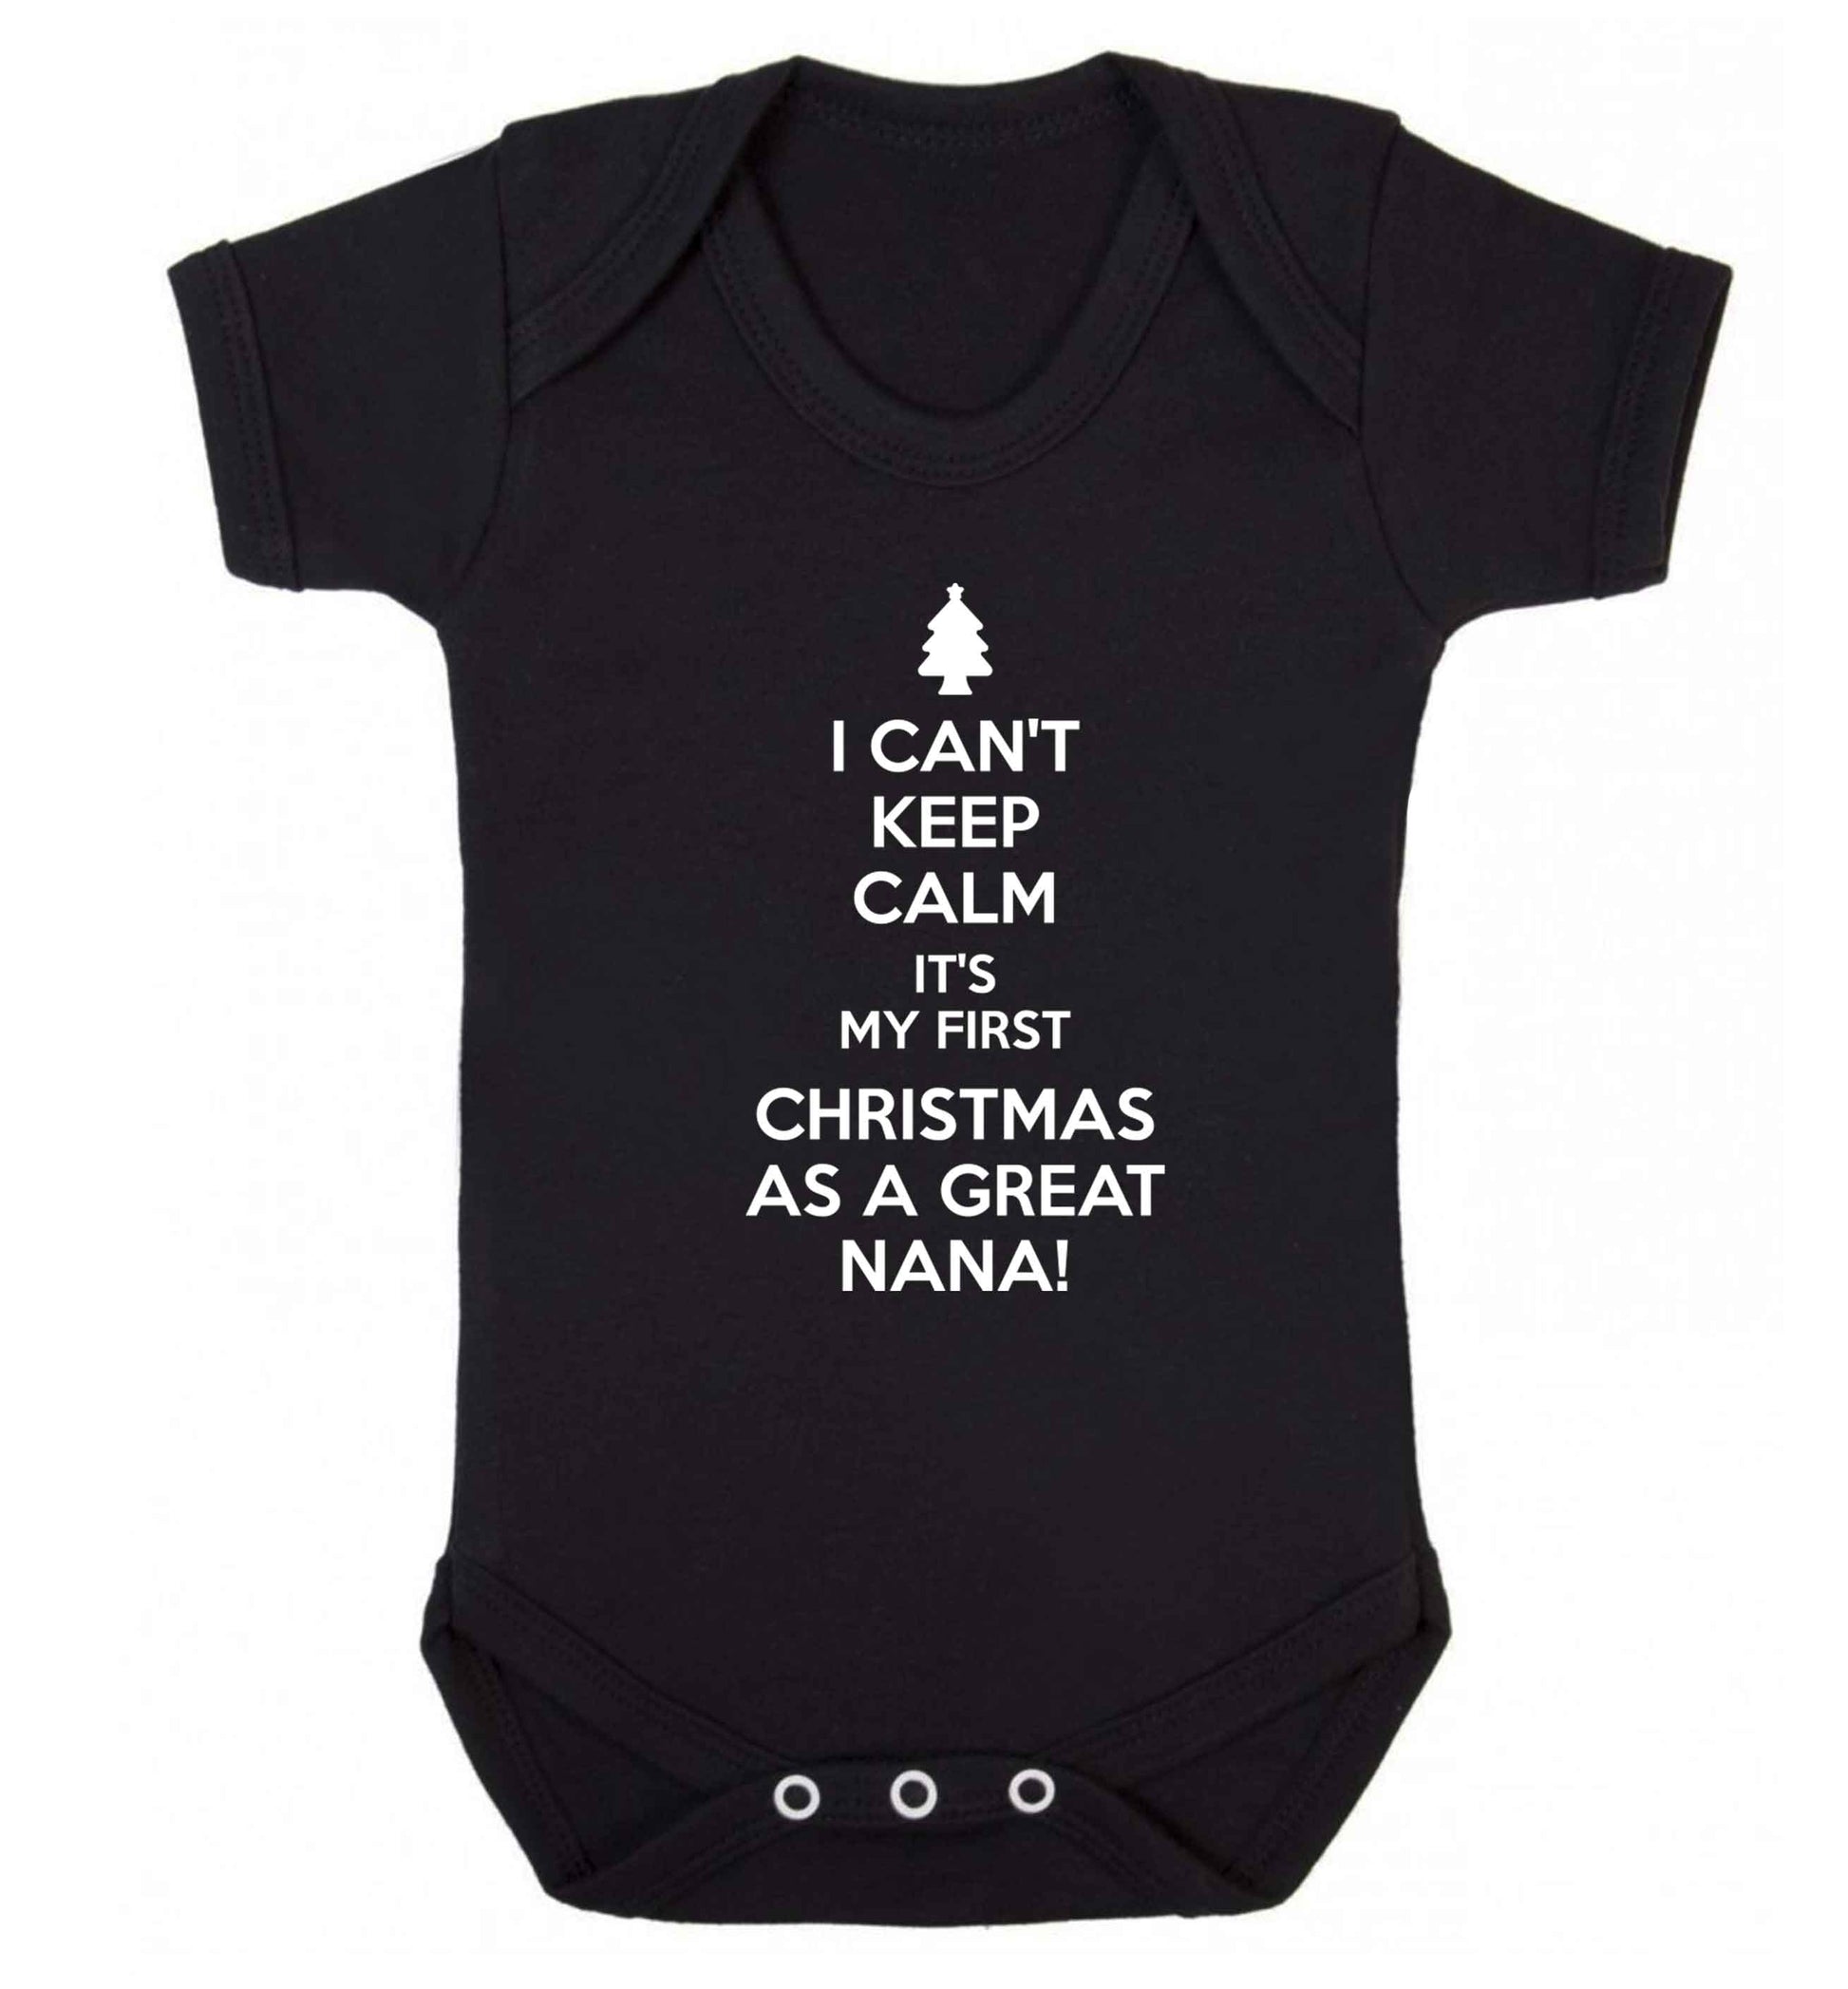 I can't keep calm it's my first Christmas as a great nana! Baby Vest black 18-24 months